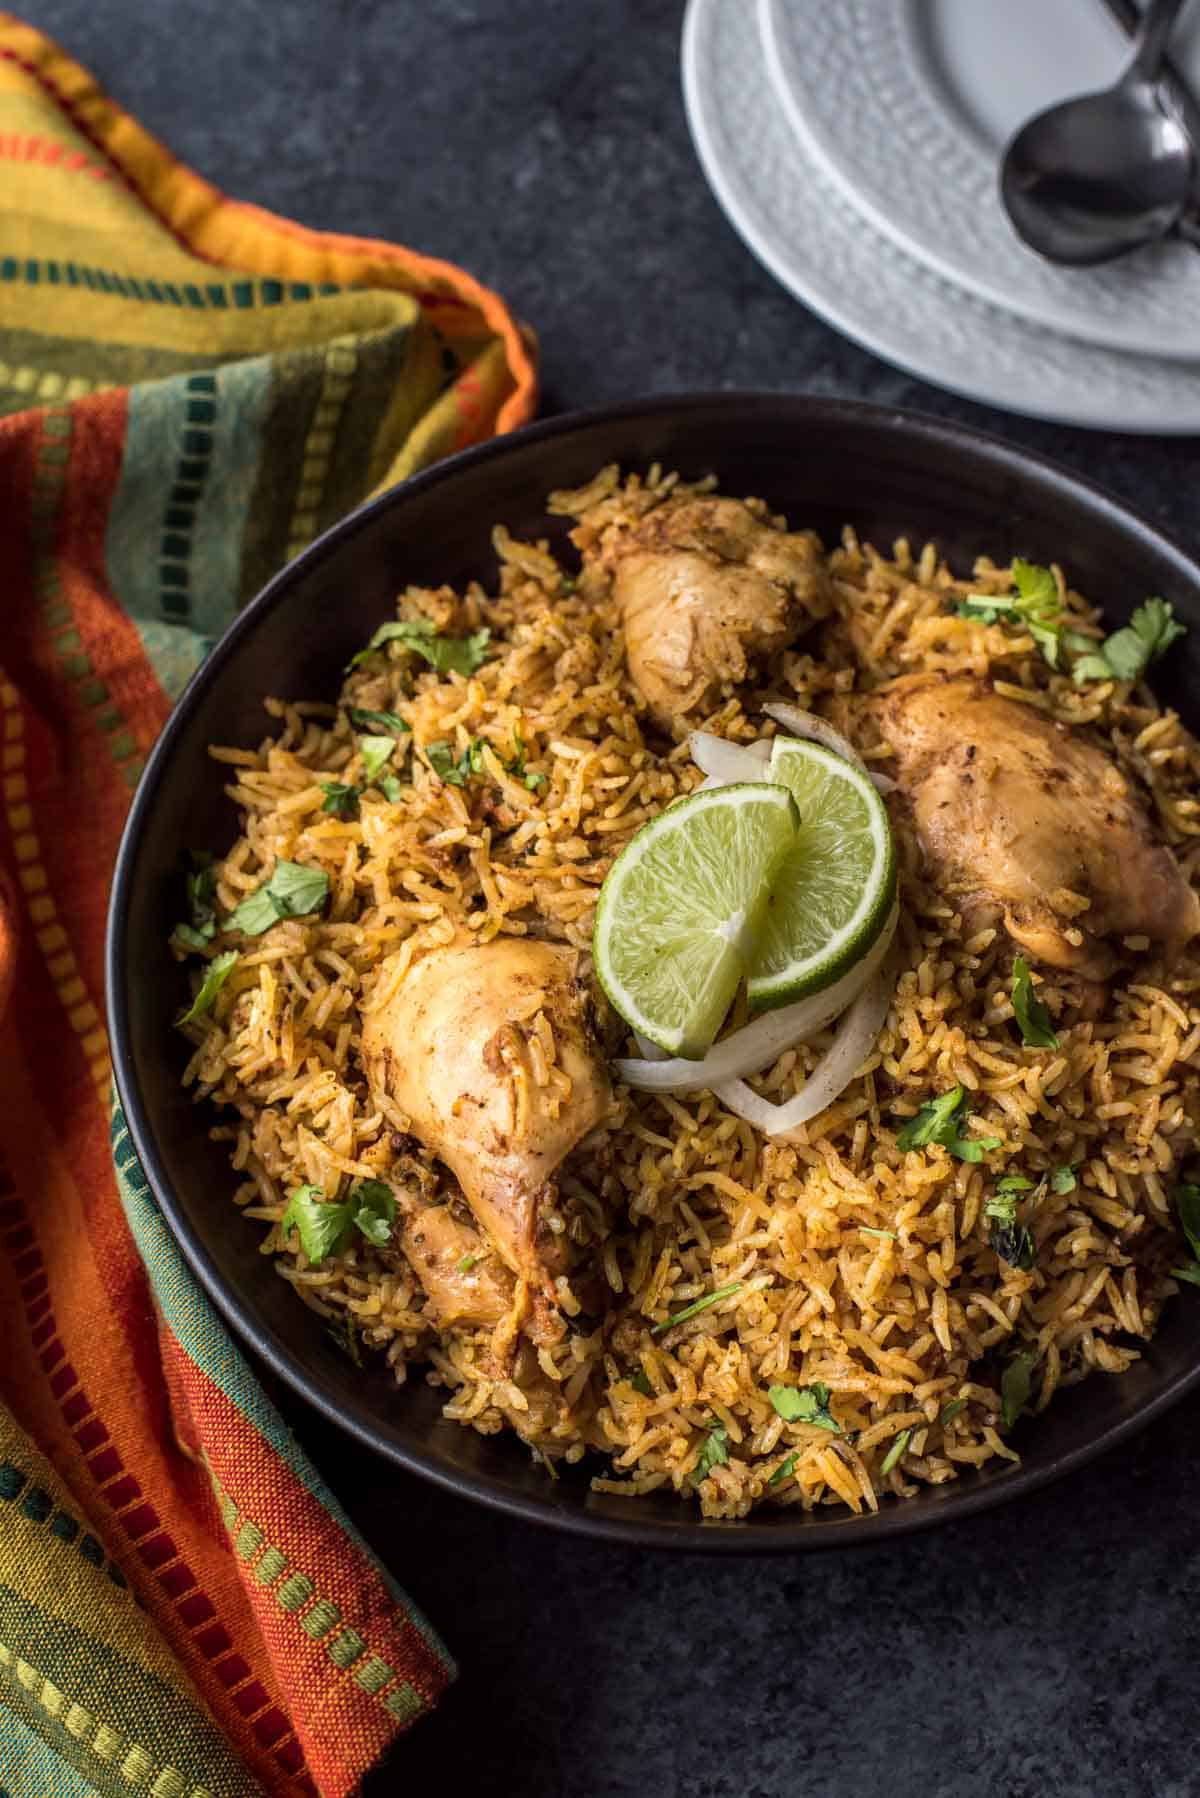 Chettinad Chicken biryani served with onions and lime in a black bowl